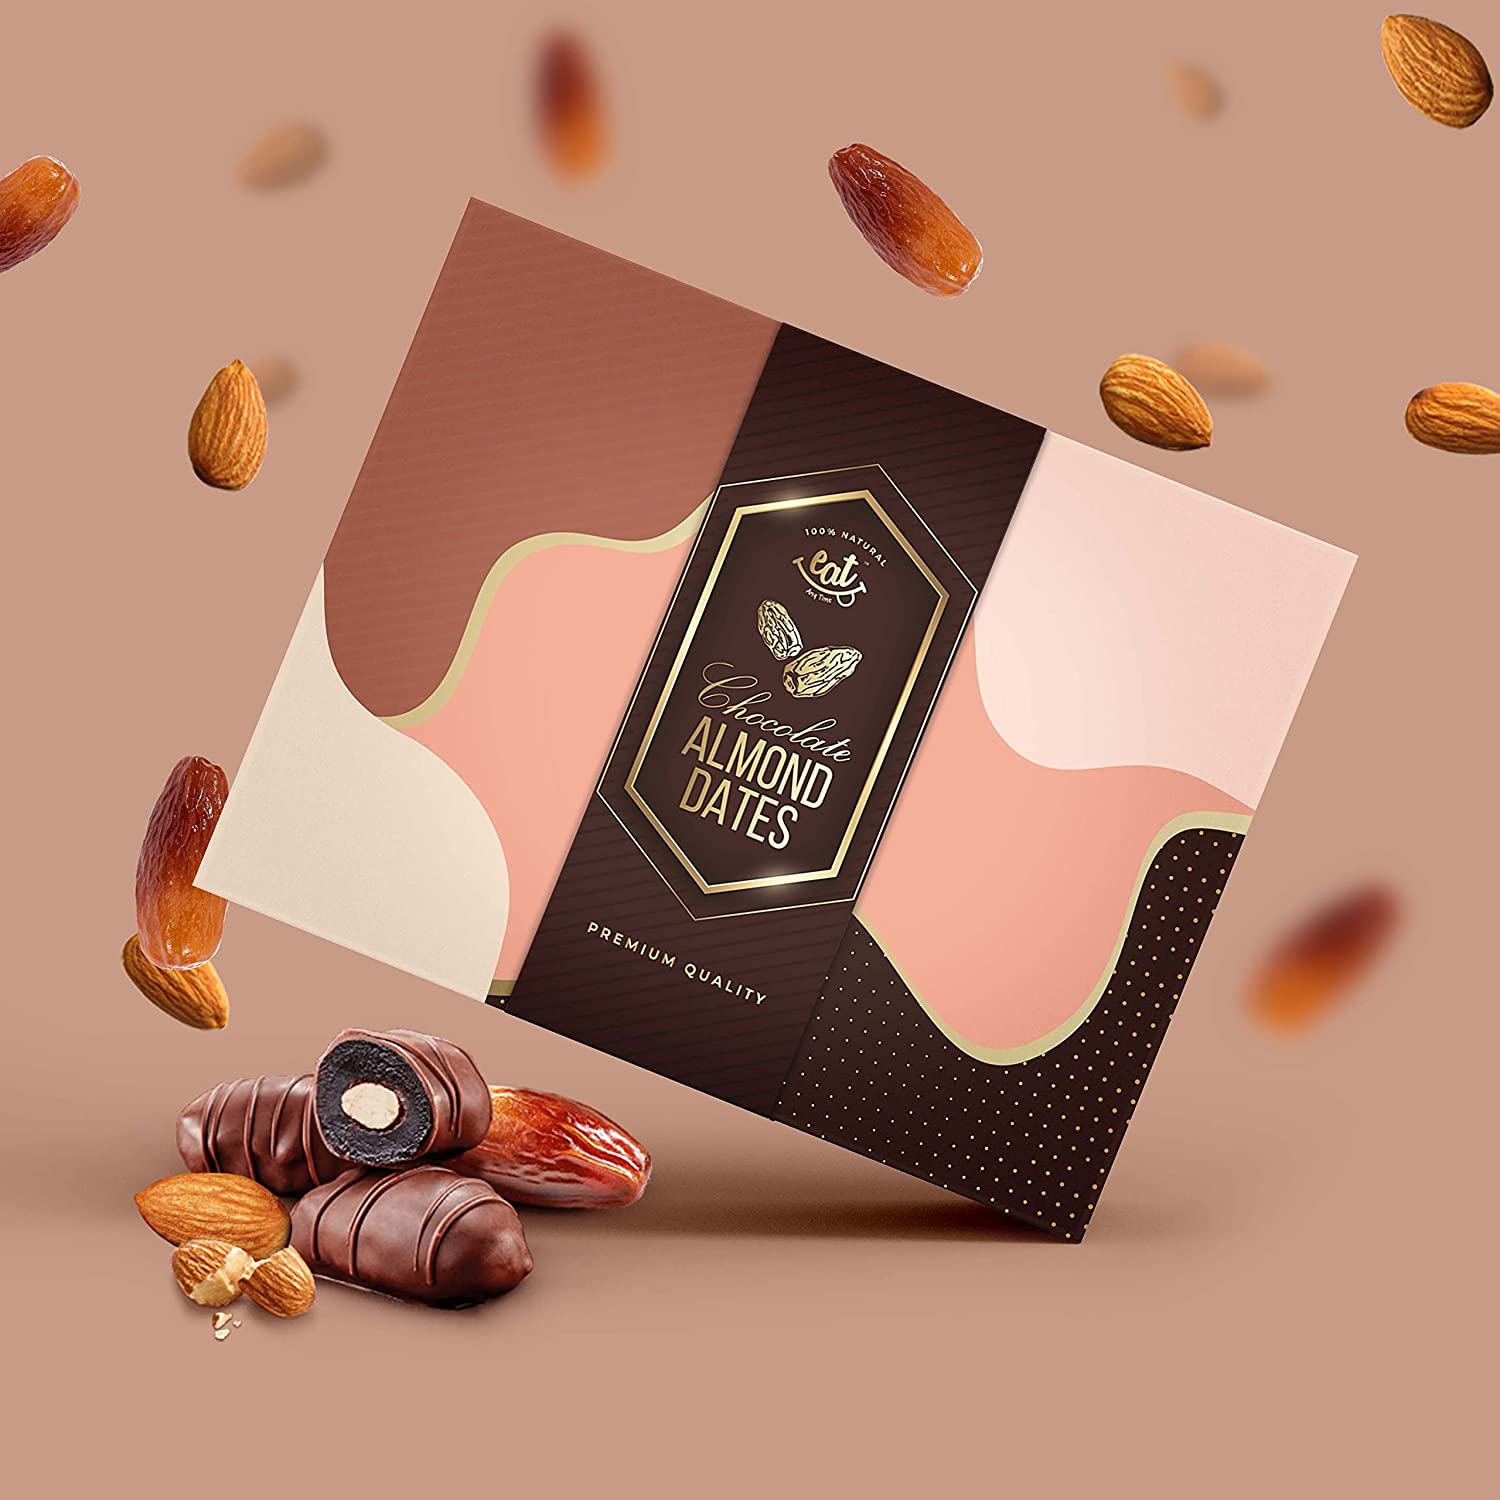 Buy Customized Chocolate Wrapper with Greeting Message Chocolate, Nuts, and  Sweet Combo Gift Set - For Employees, Dealers, Customers, Stakeholders,  Personal or Corporate Diwali Gifting CV11 online - The Gifting Marketplace